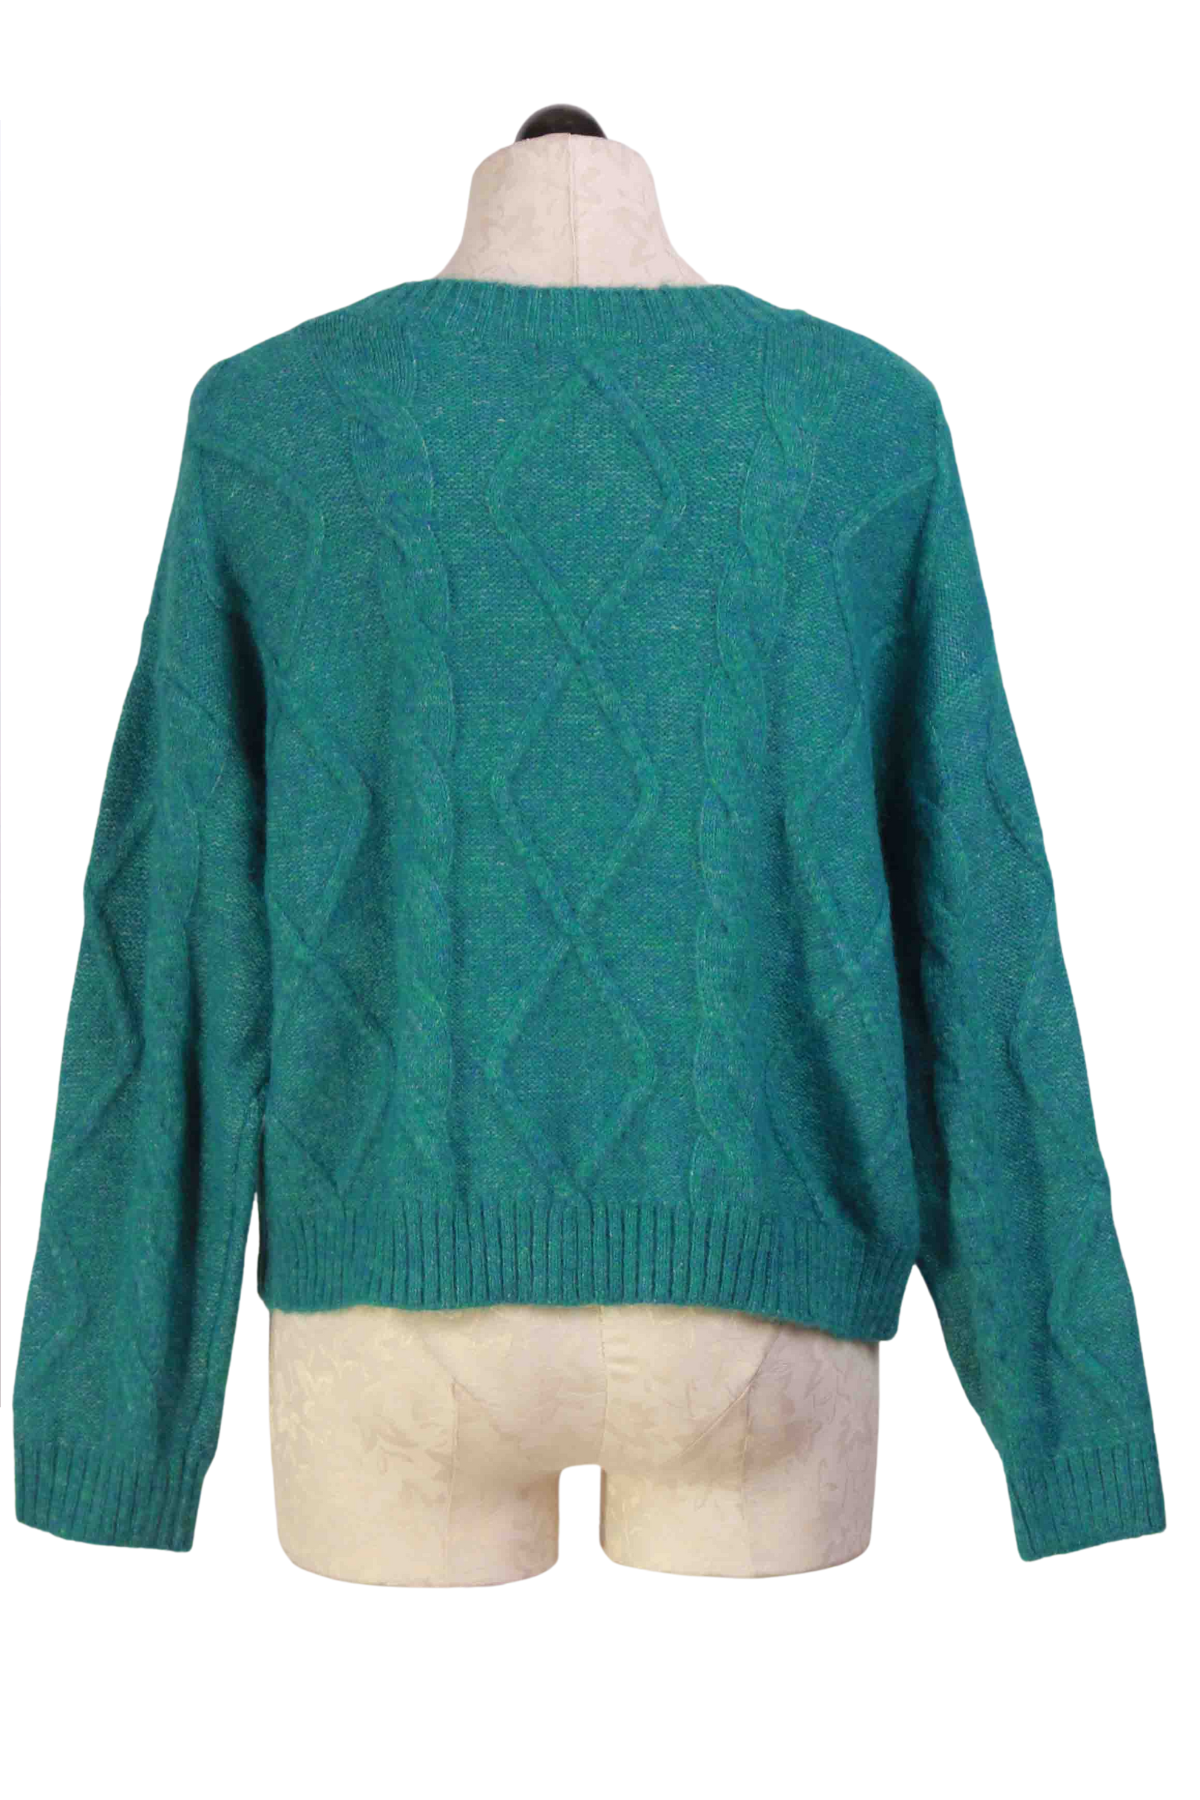 back view of Teal blue Cropped Cable Knit Pullover Sweater by Compania Fantastica